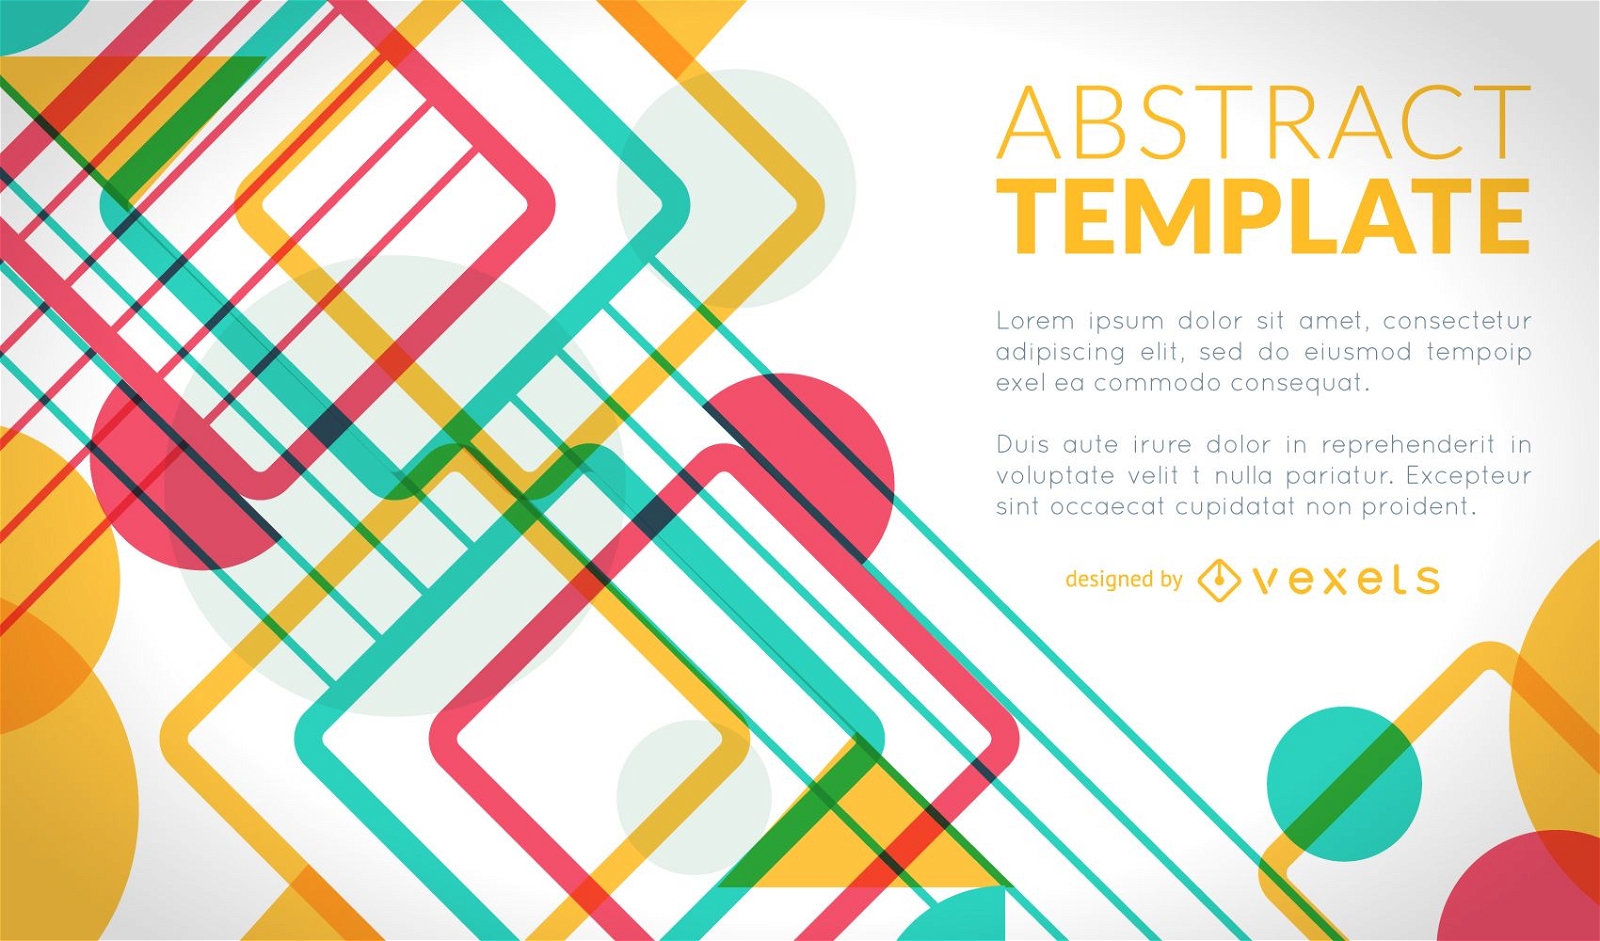 Colorful poster design with geometric shapes